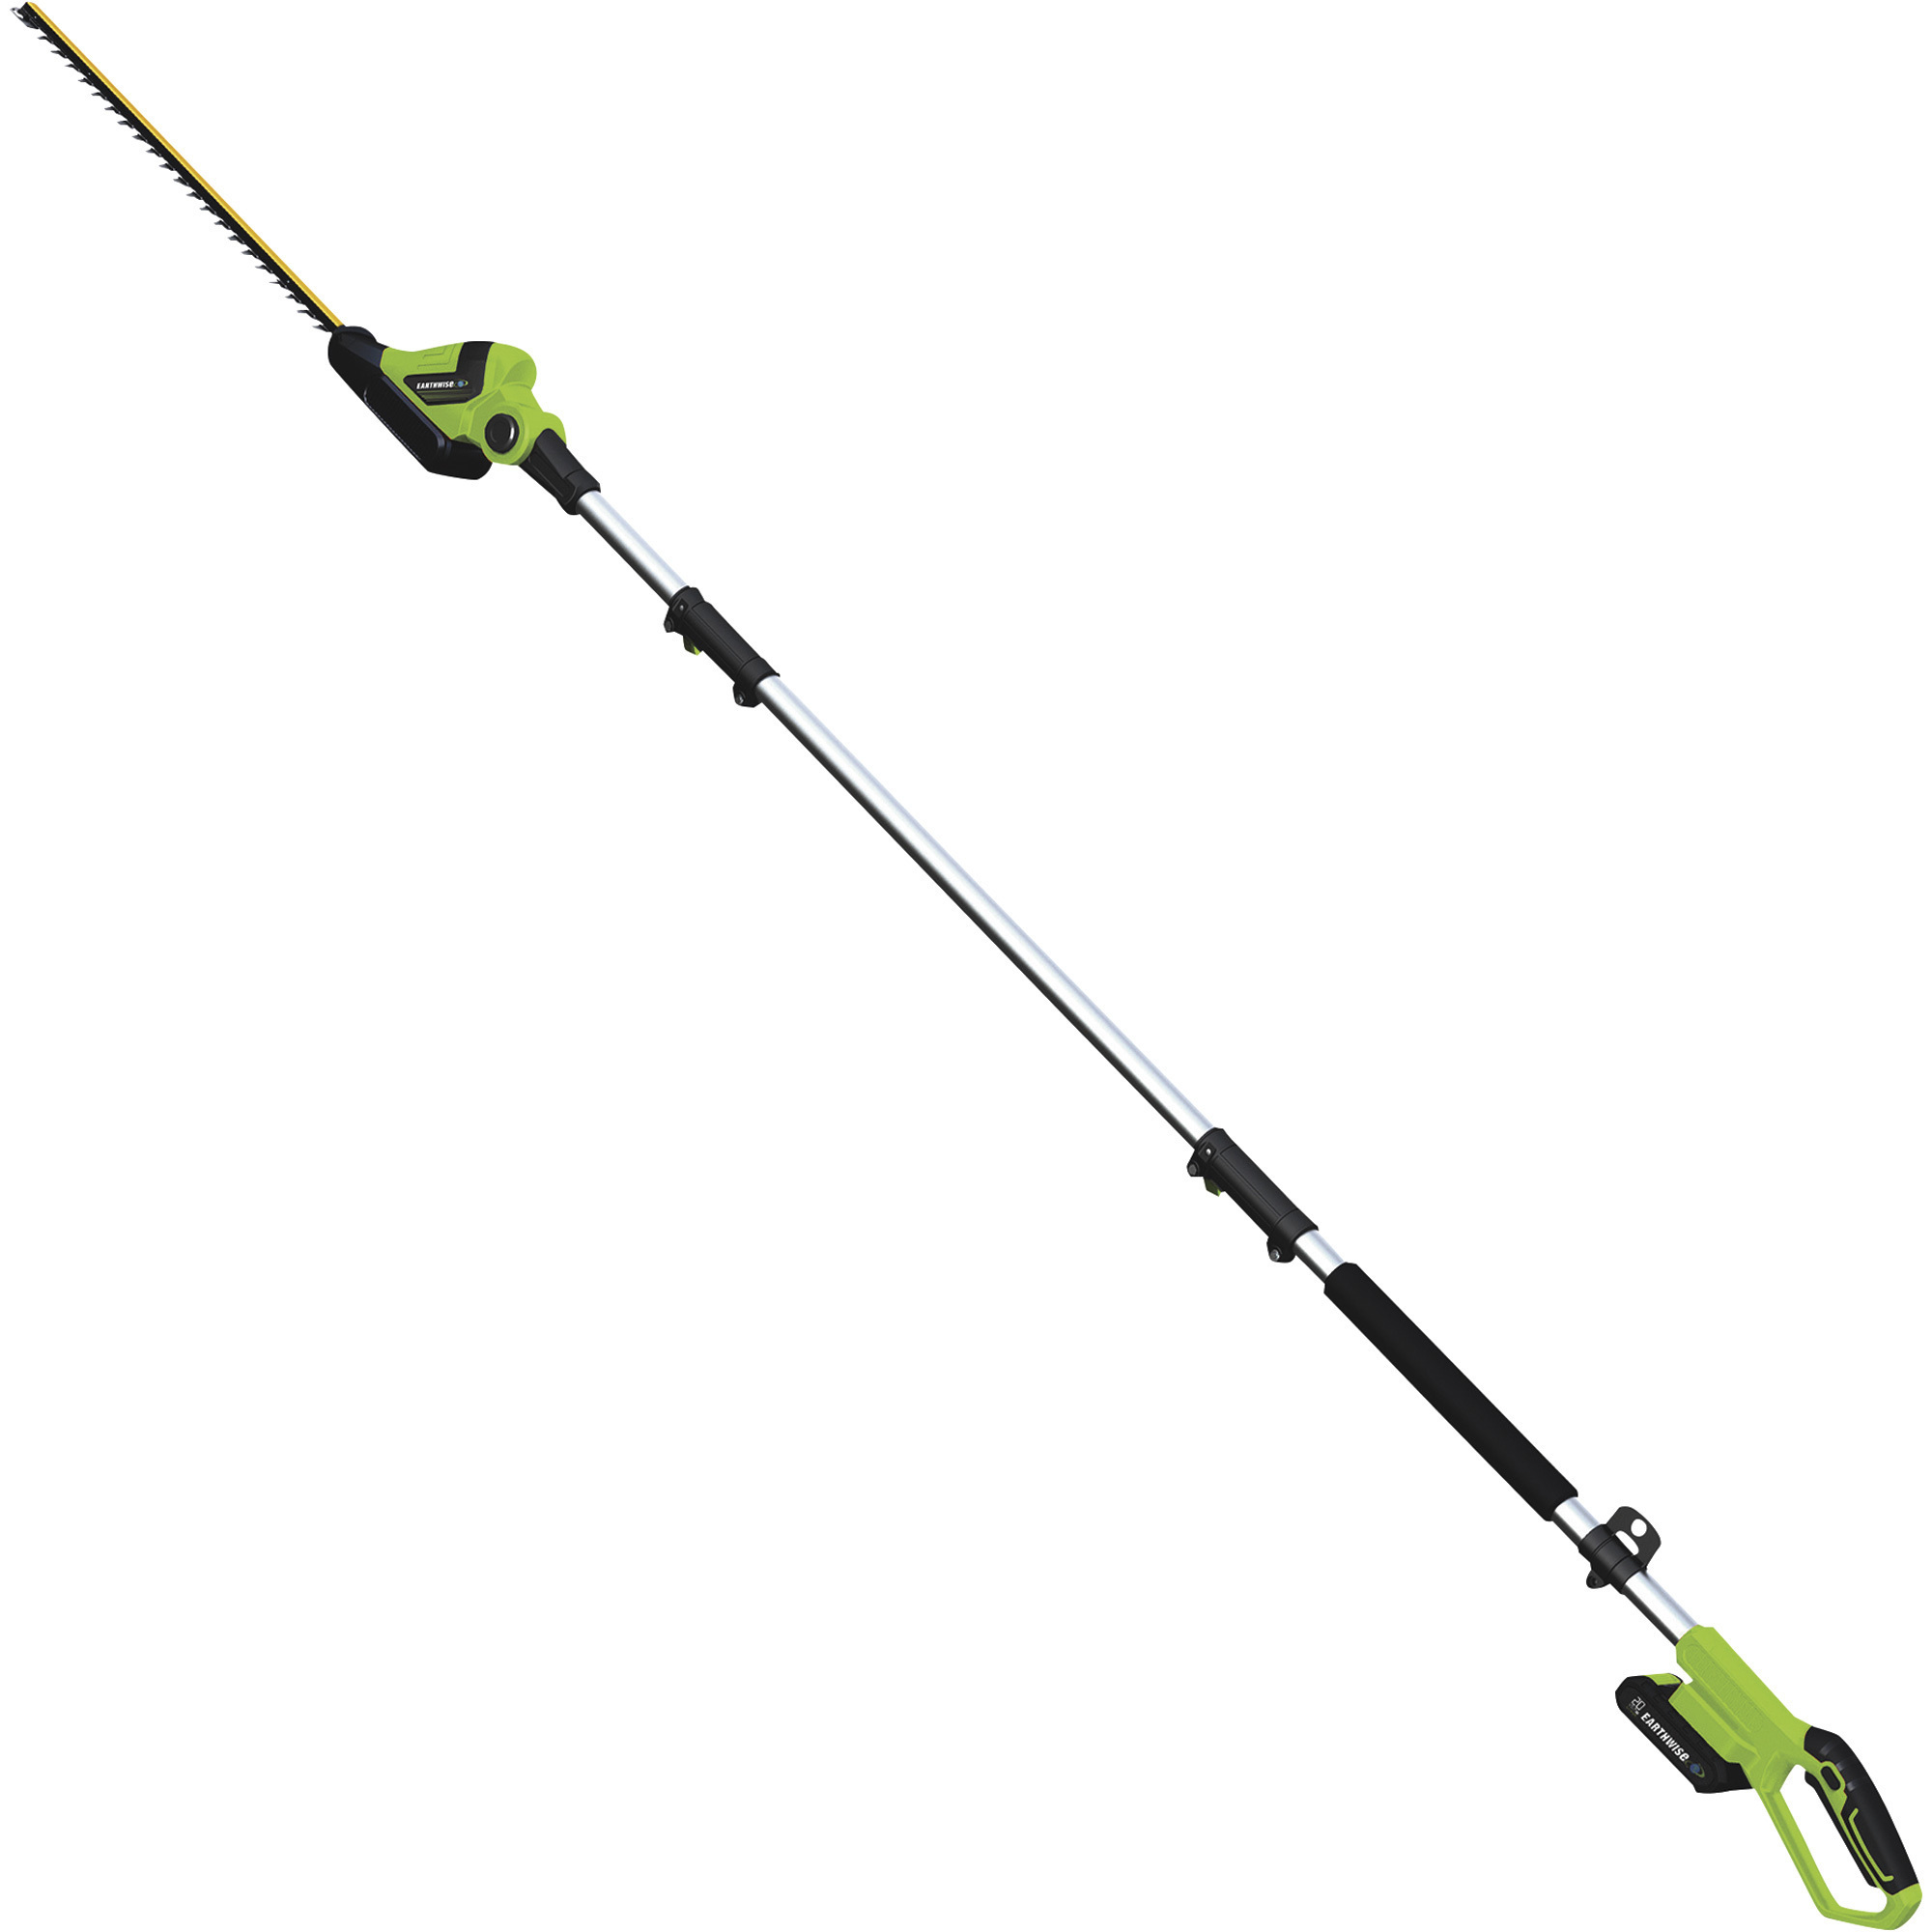 Earthwise Cordless Pole Hedge Trimmer, 20Inch Bar, 20 Volt, Model LPHT12022